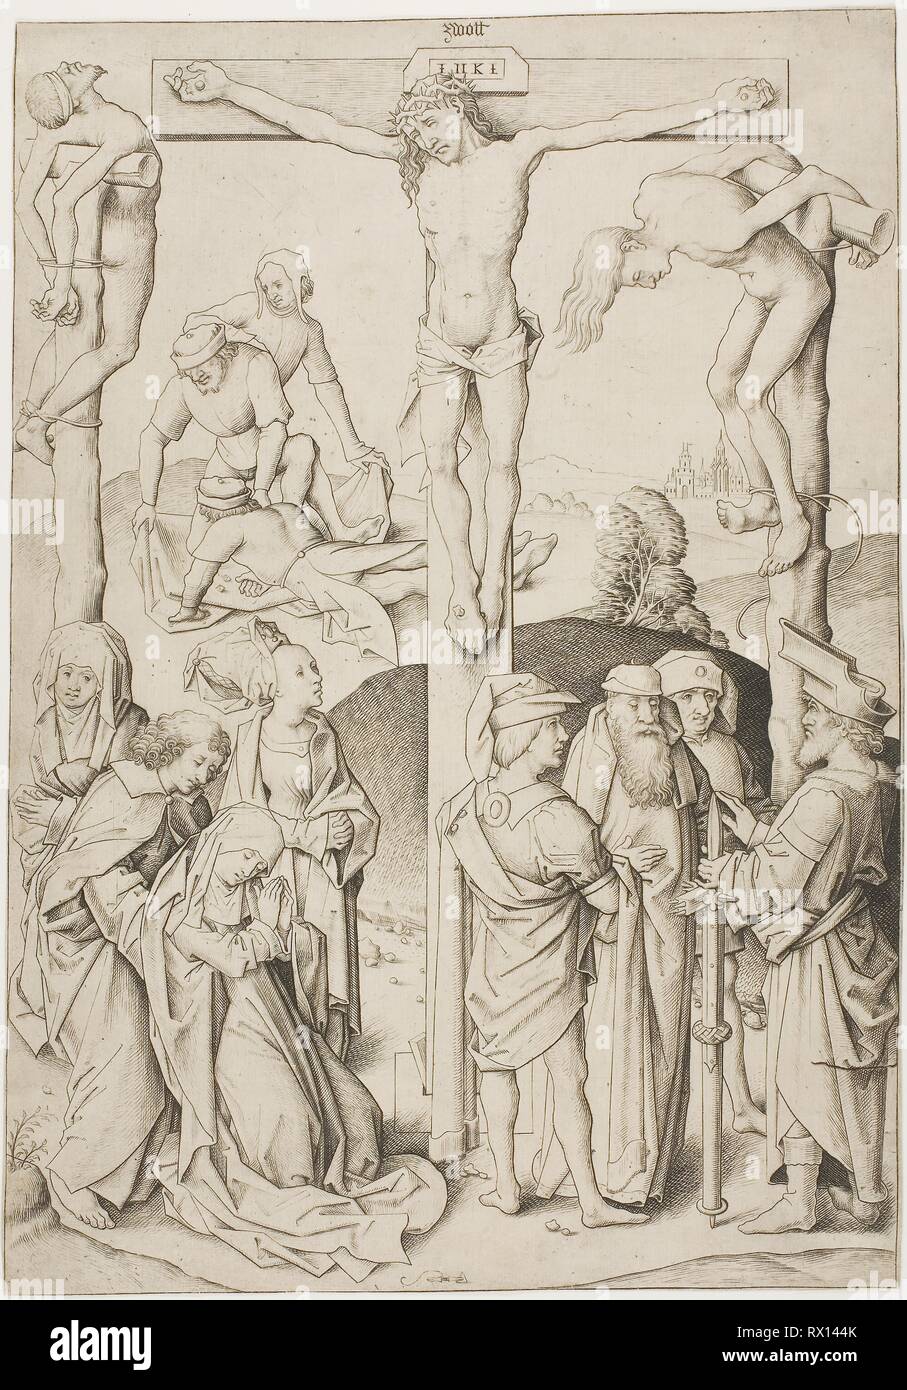 The Calvary. Master I.A.M. of Zwolle; Netherlandish, active c. 1470-95. Date: 1475-1485. Dimensions: 306 x 213 mm (image); 307 x 215 mm (sheet). Engraving in warm black on paper. Origin: Netherlands. Museum: The Chicago Art Institute. Stock Photo